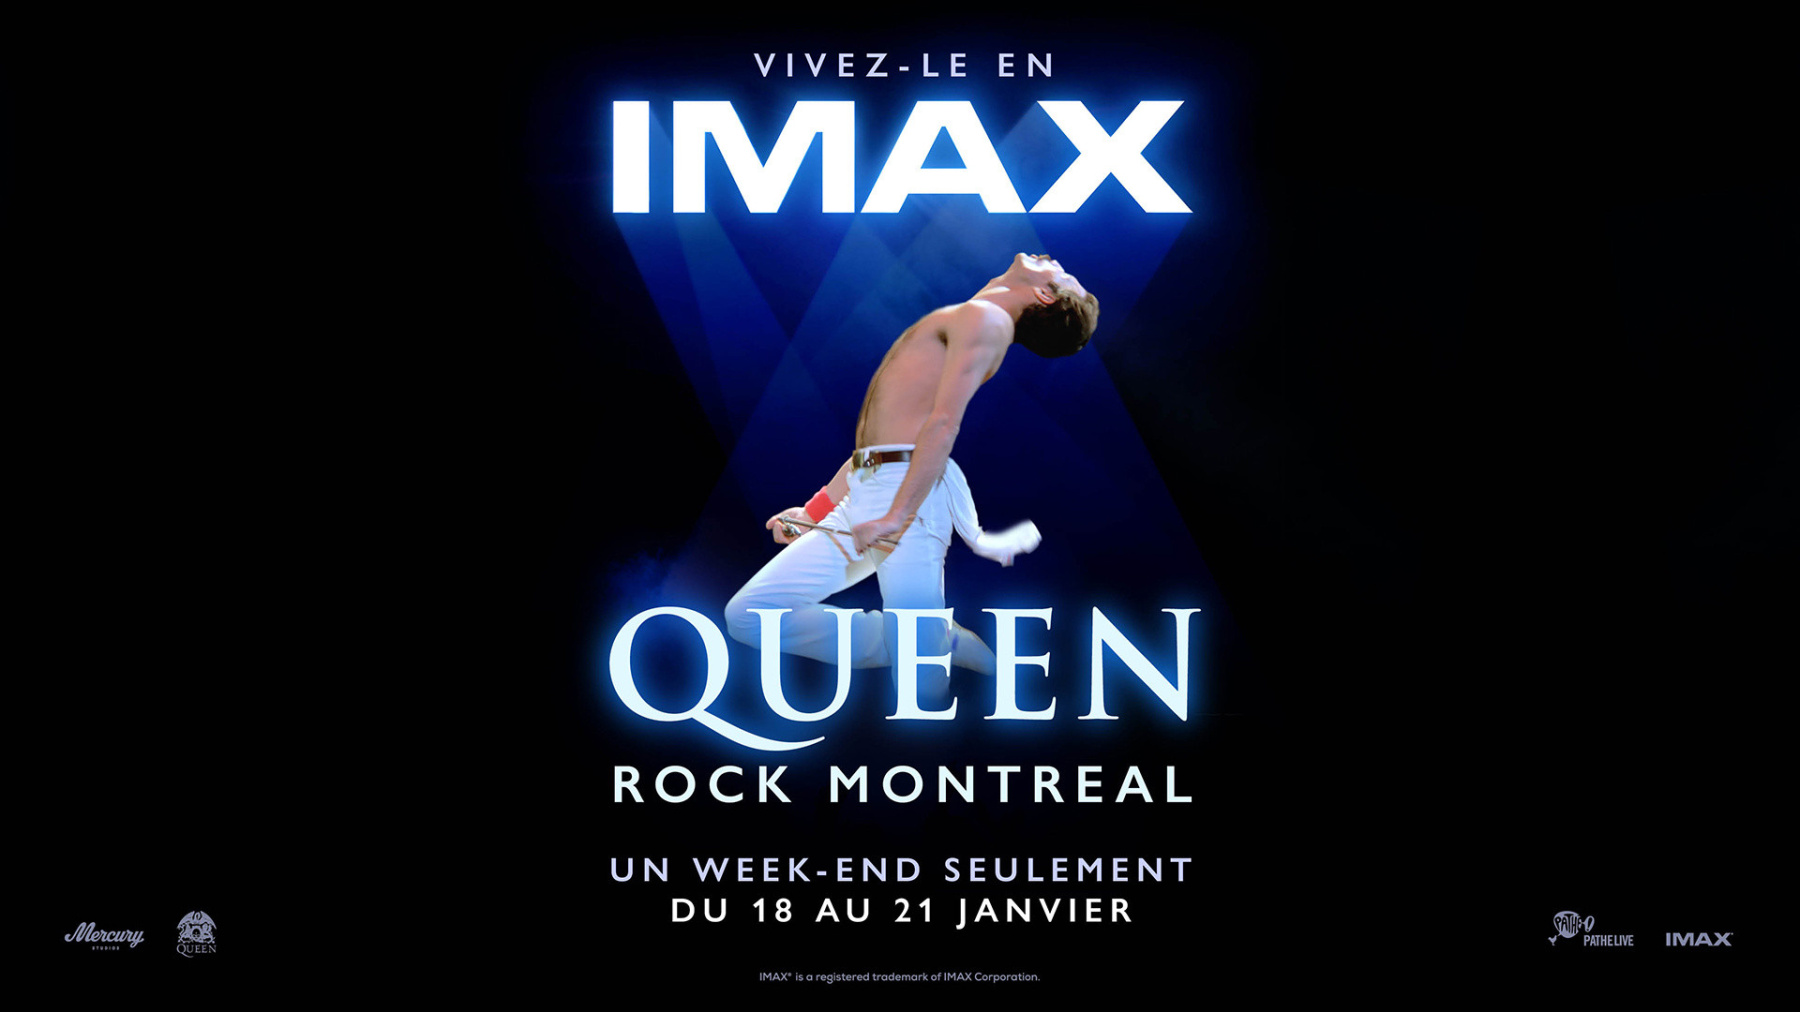 Queen Rock Montreal concert to be shown in IMAX theaters in January